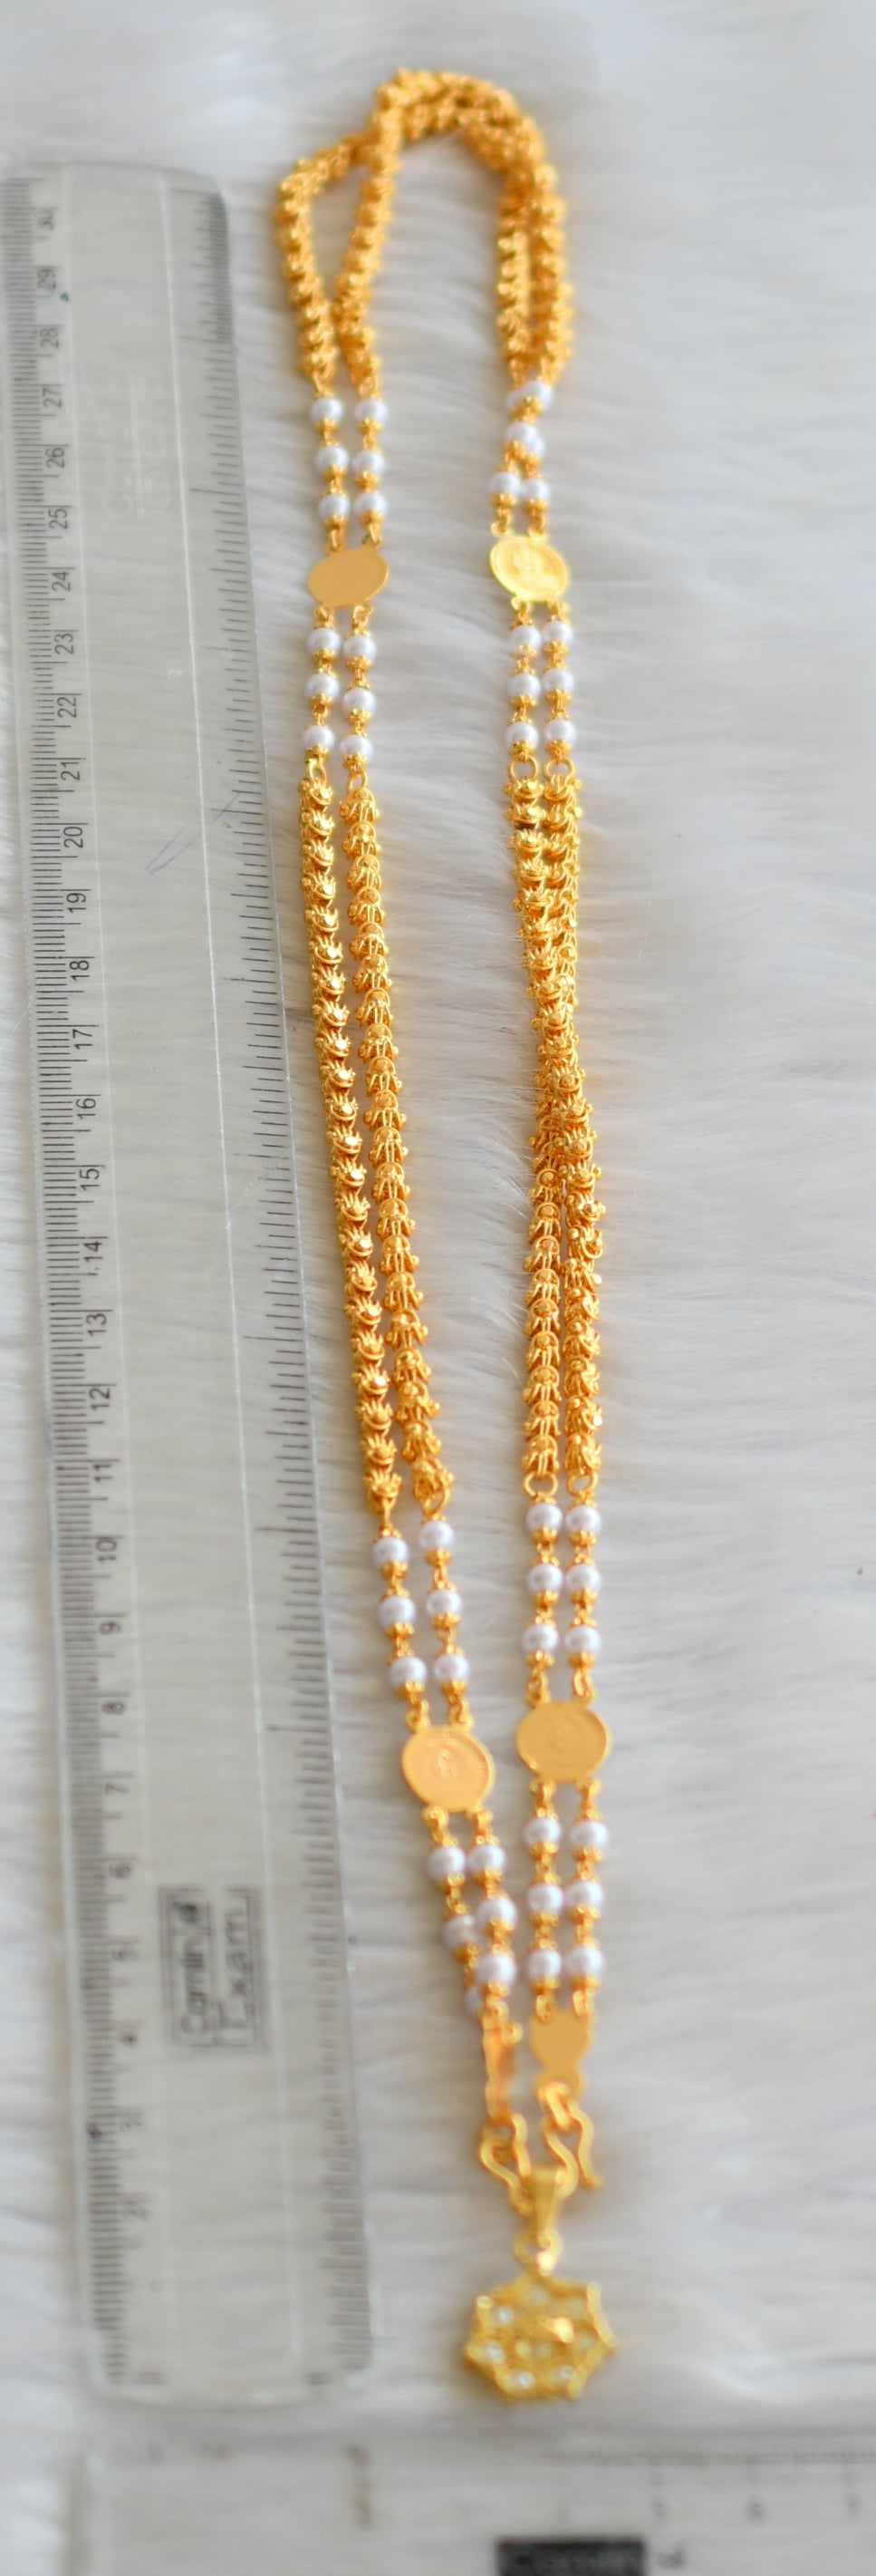 Gold tone double layer Lakshmi coin chain with pearl pendant dj-41627